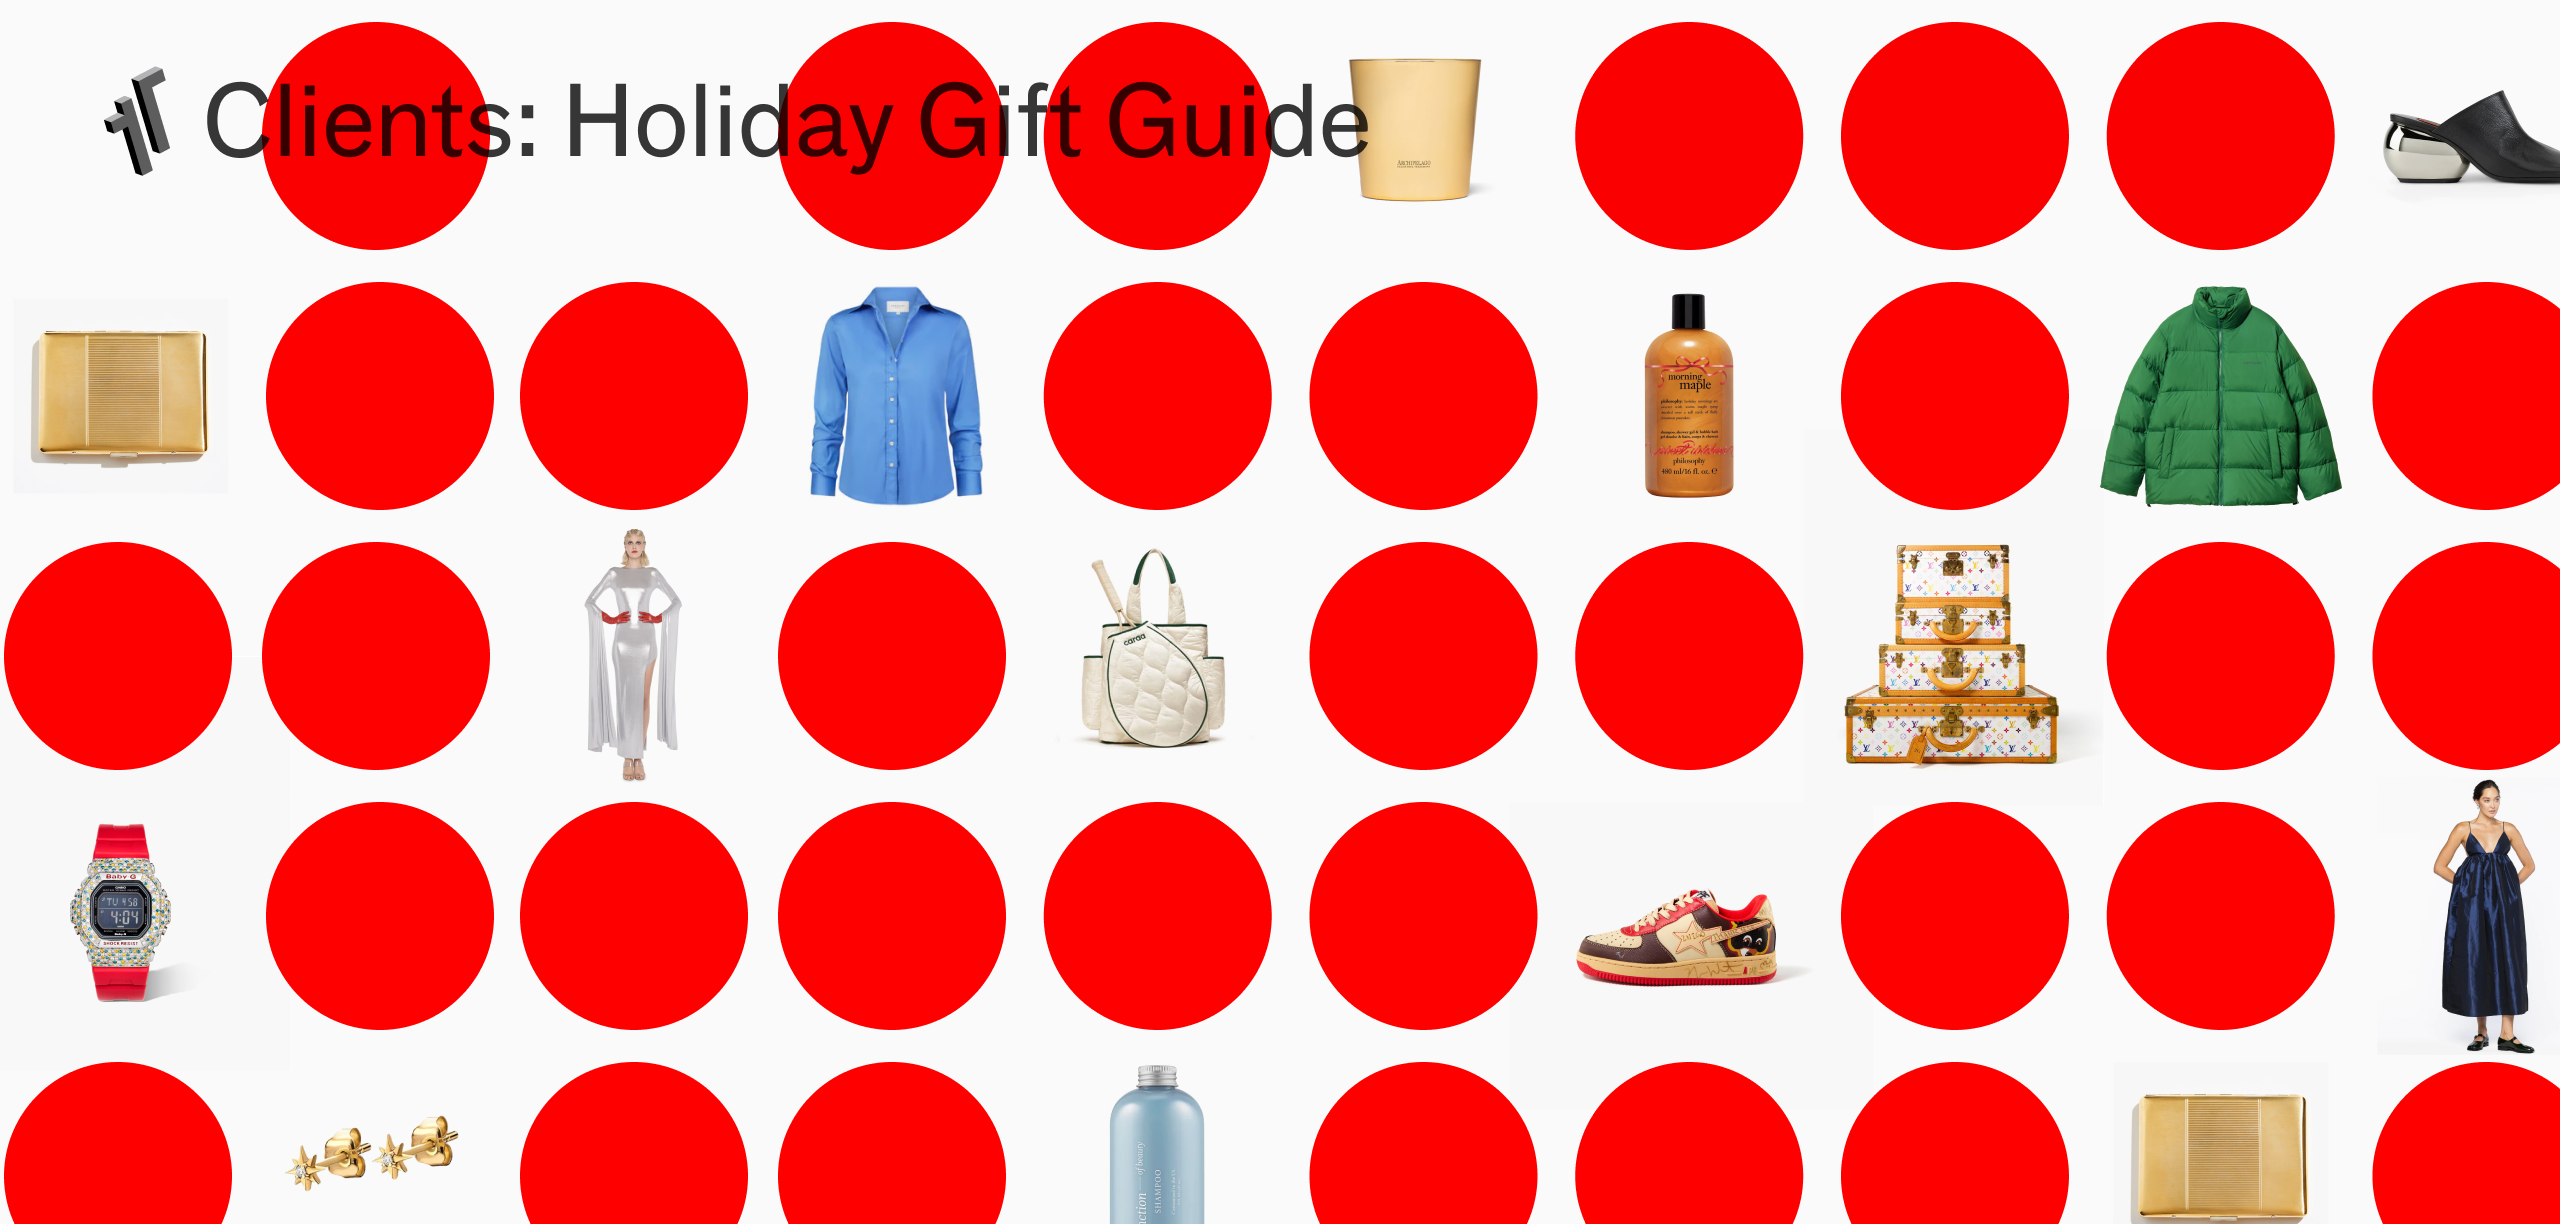 1r Clients Holiday Gift Guide Image